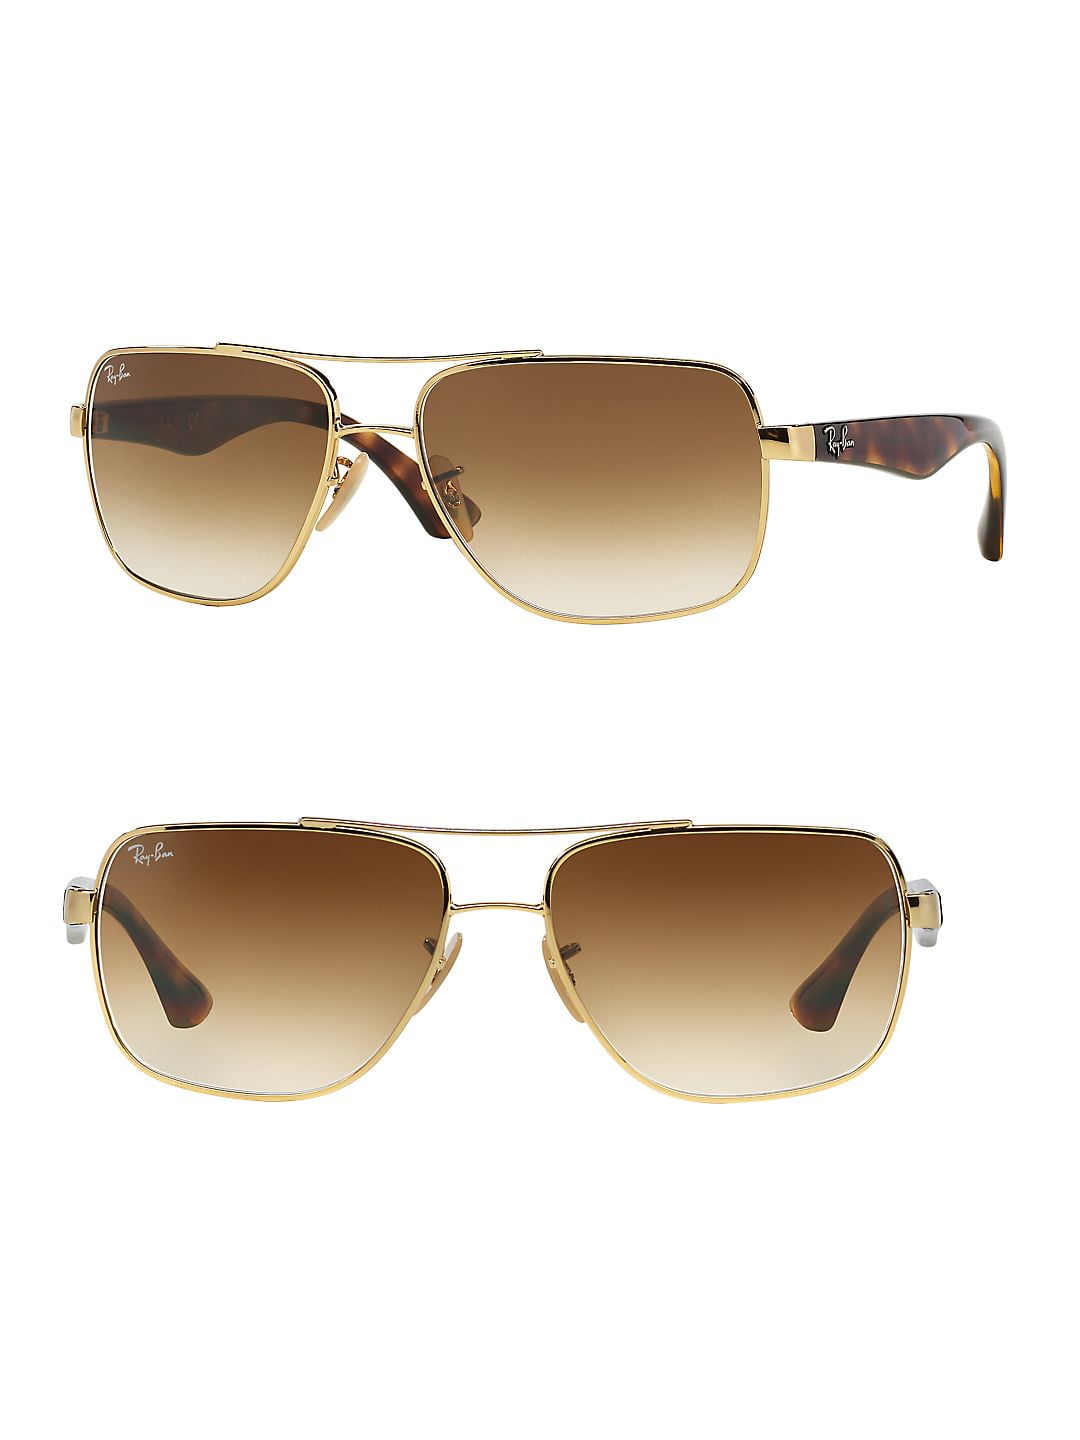 Ray Ban Rb3483 001 51 Gold Tortoise Square Light Brown Gradient Metal Sunglasses Frames